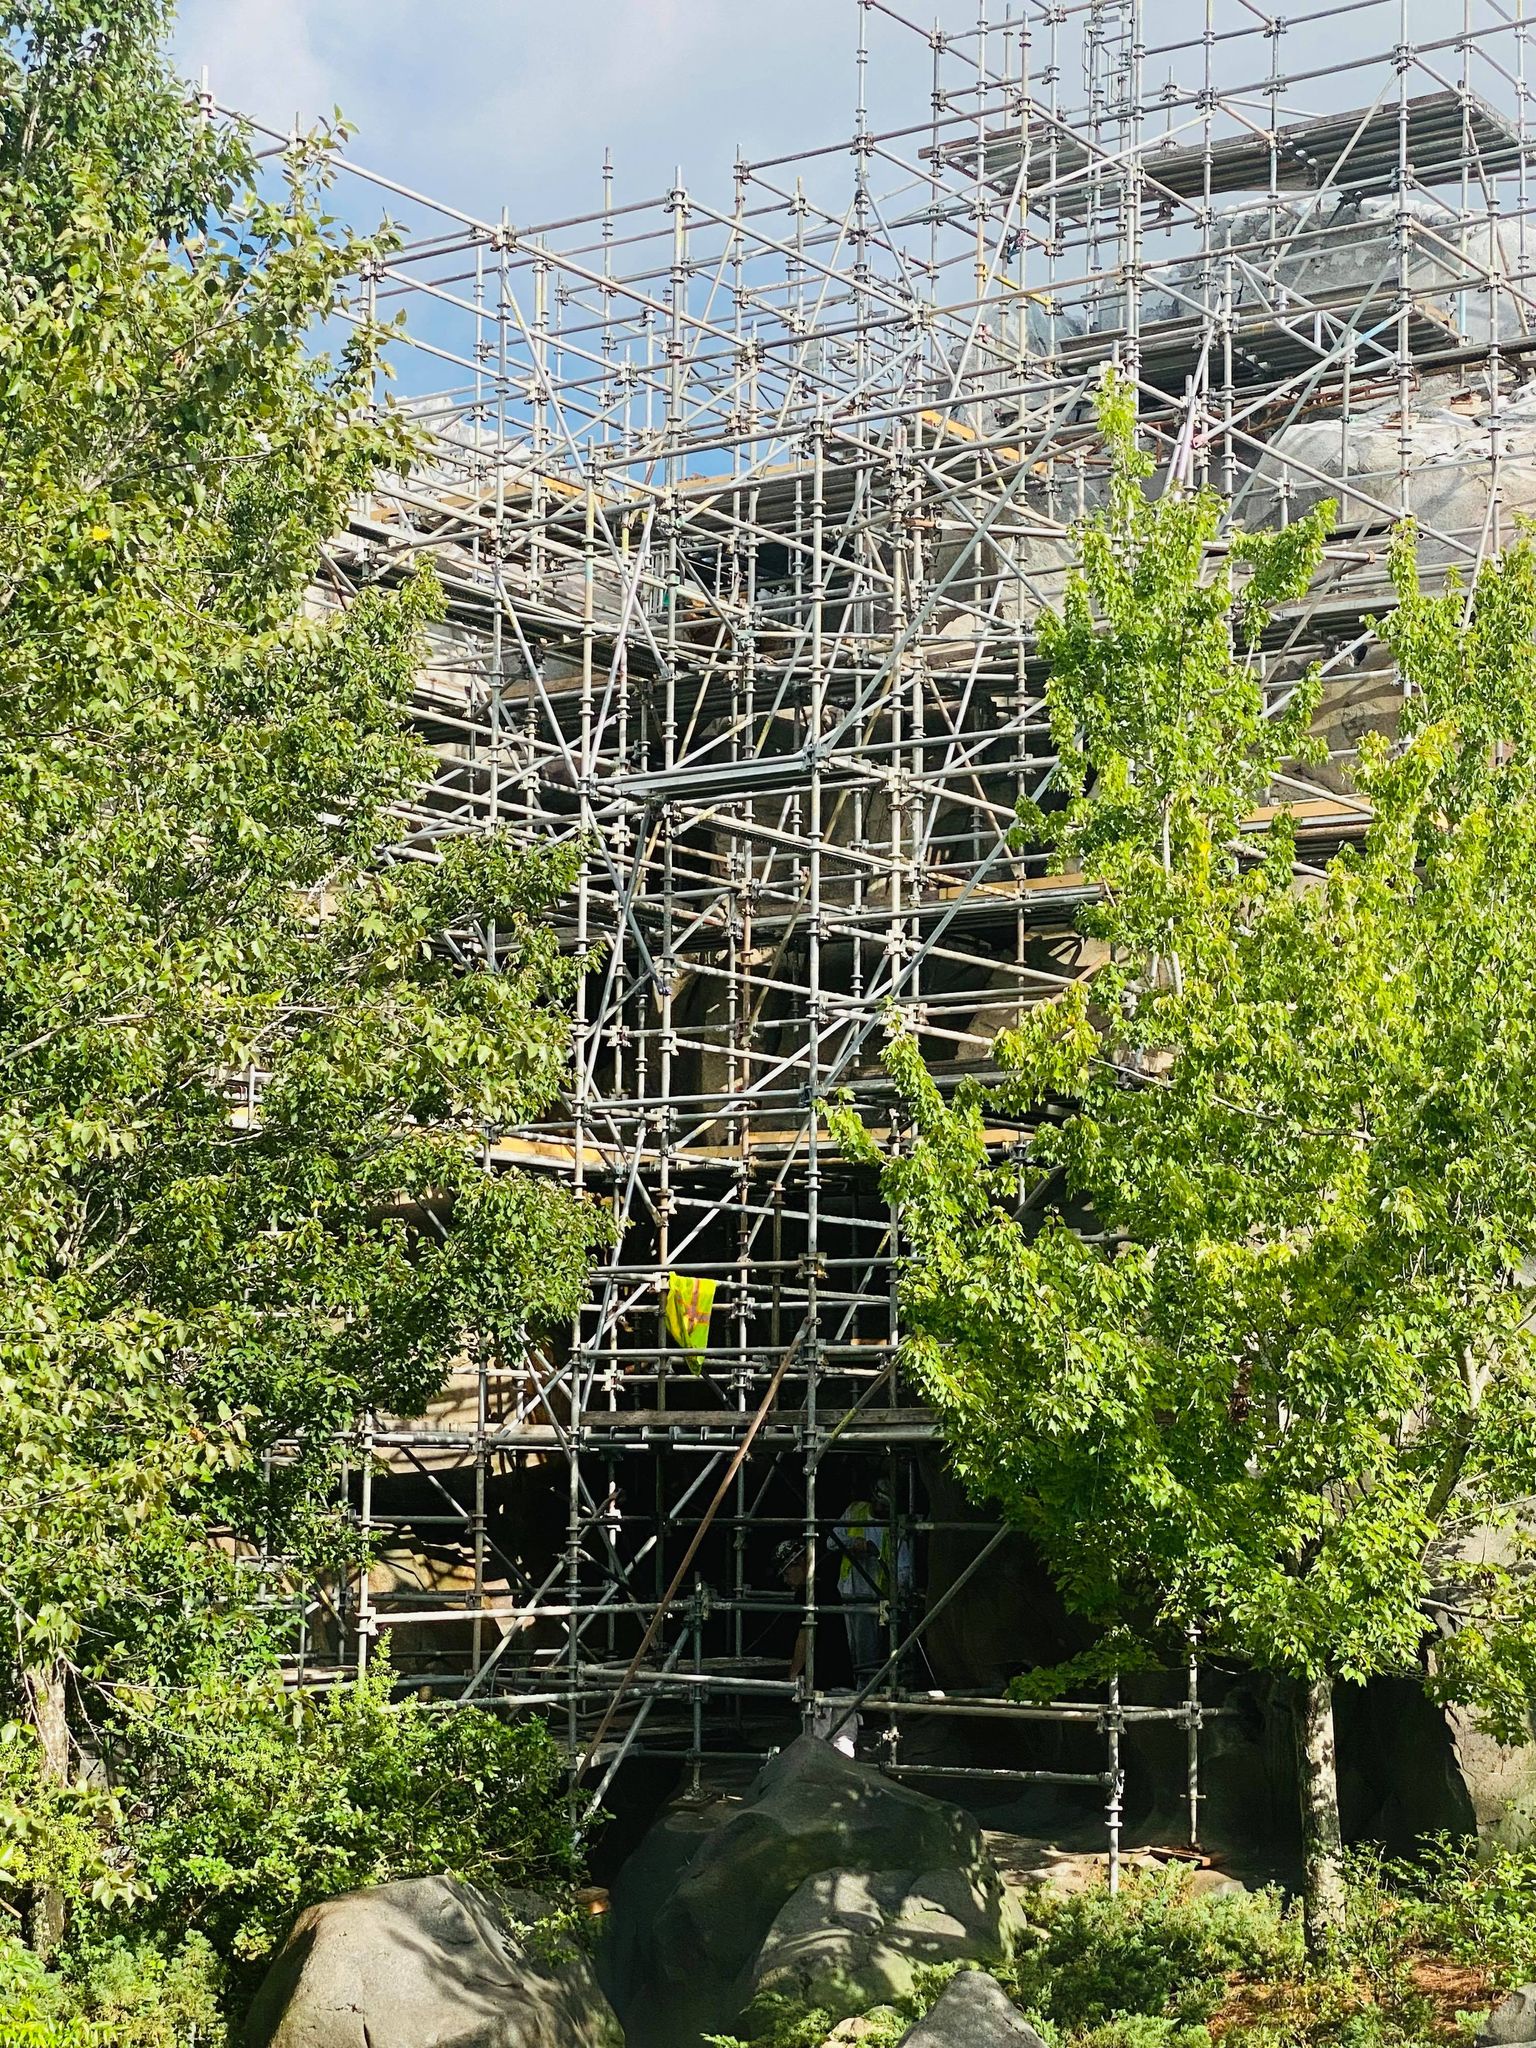 be our guest scaffolding construction work